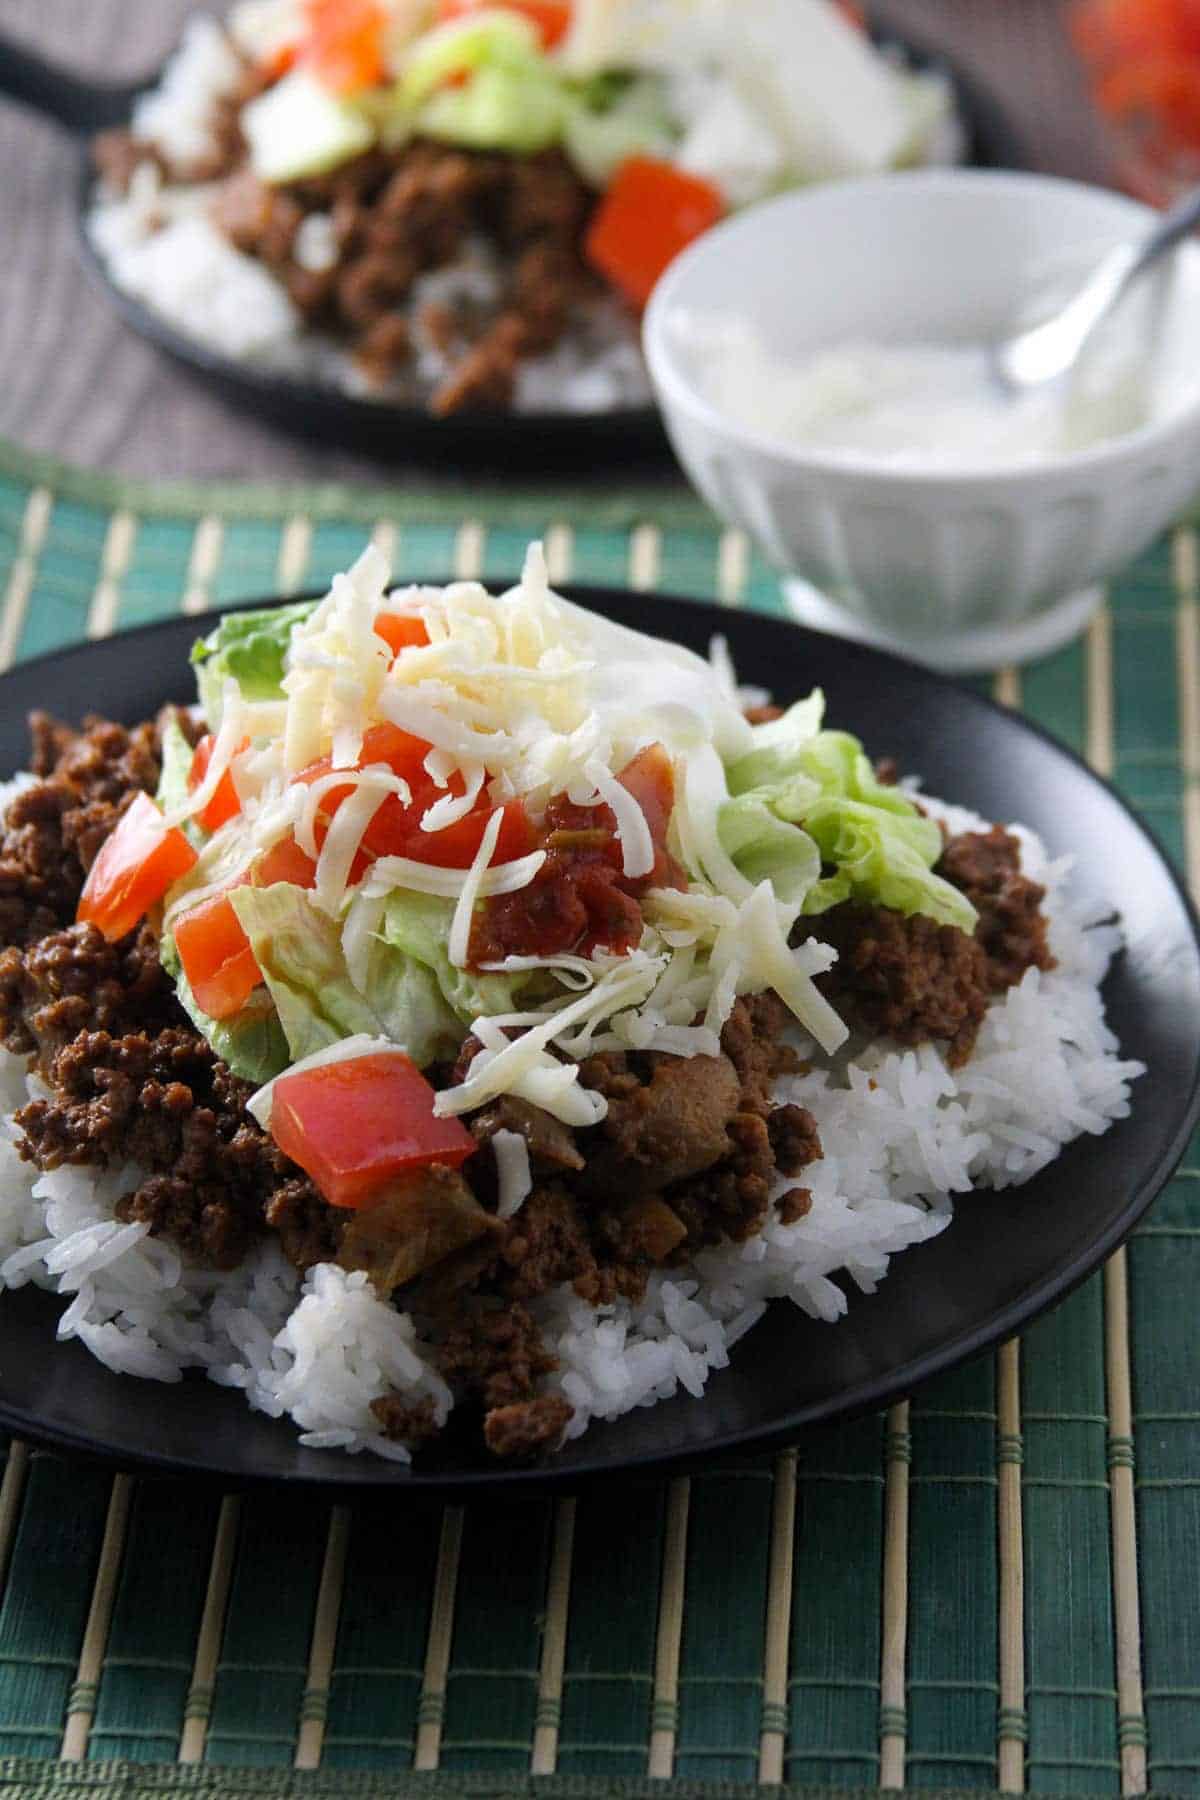 Taco Rice Recipe (Okinawan Taco Fillings Served on Rice) - Cooking